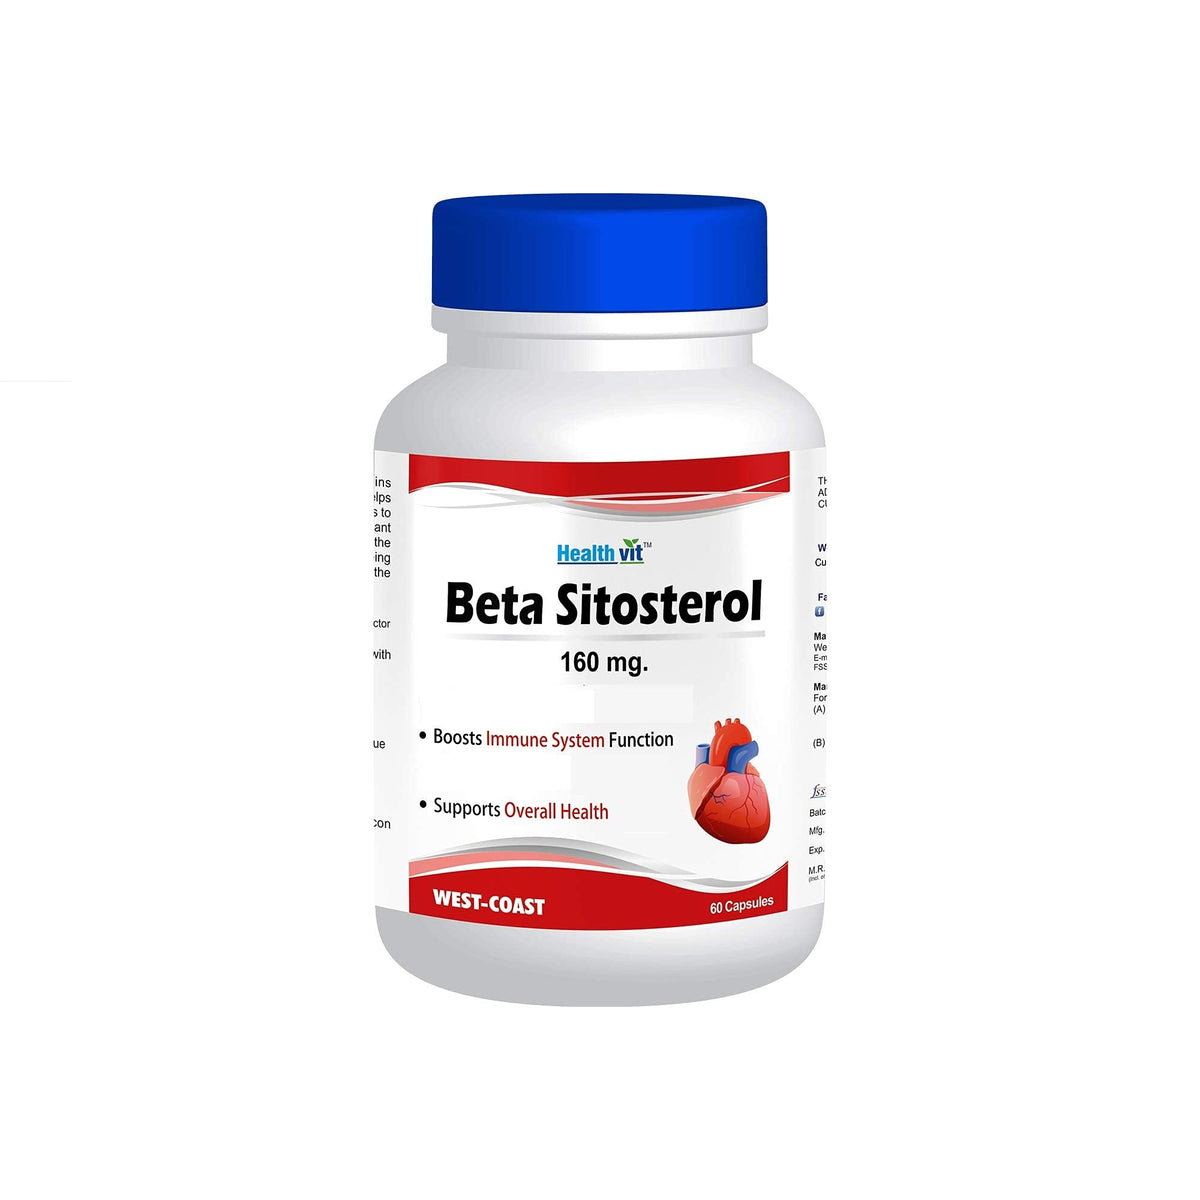 Healthvit Beta-Sitosterol 160mg (From Plant Sterol Complex) For Cardiovascular Health | Supports Cholesterol Level And Overall Health | 60 Capsules